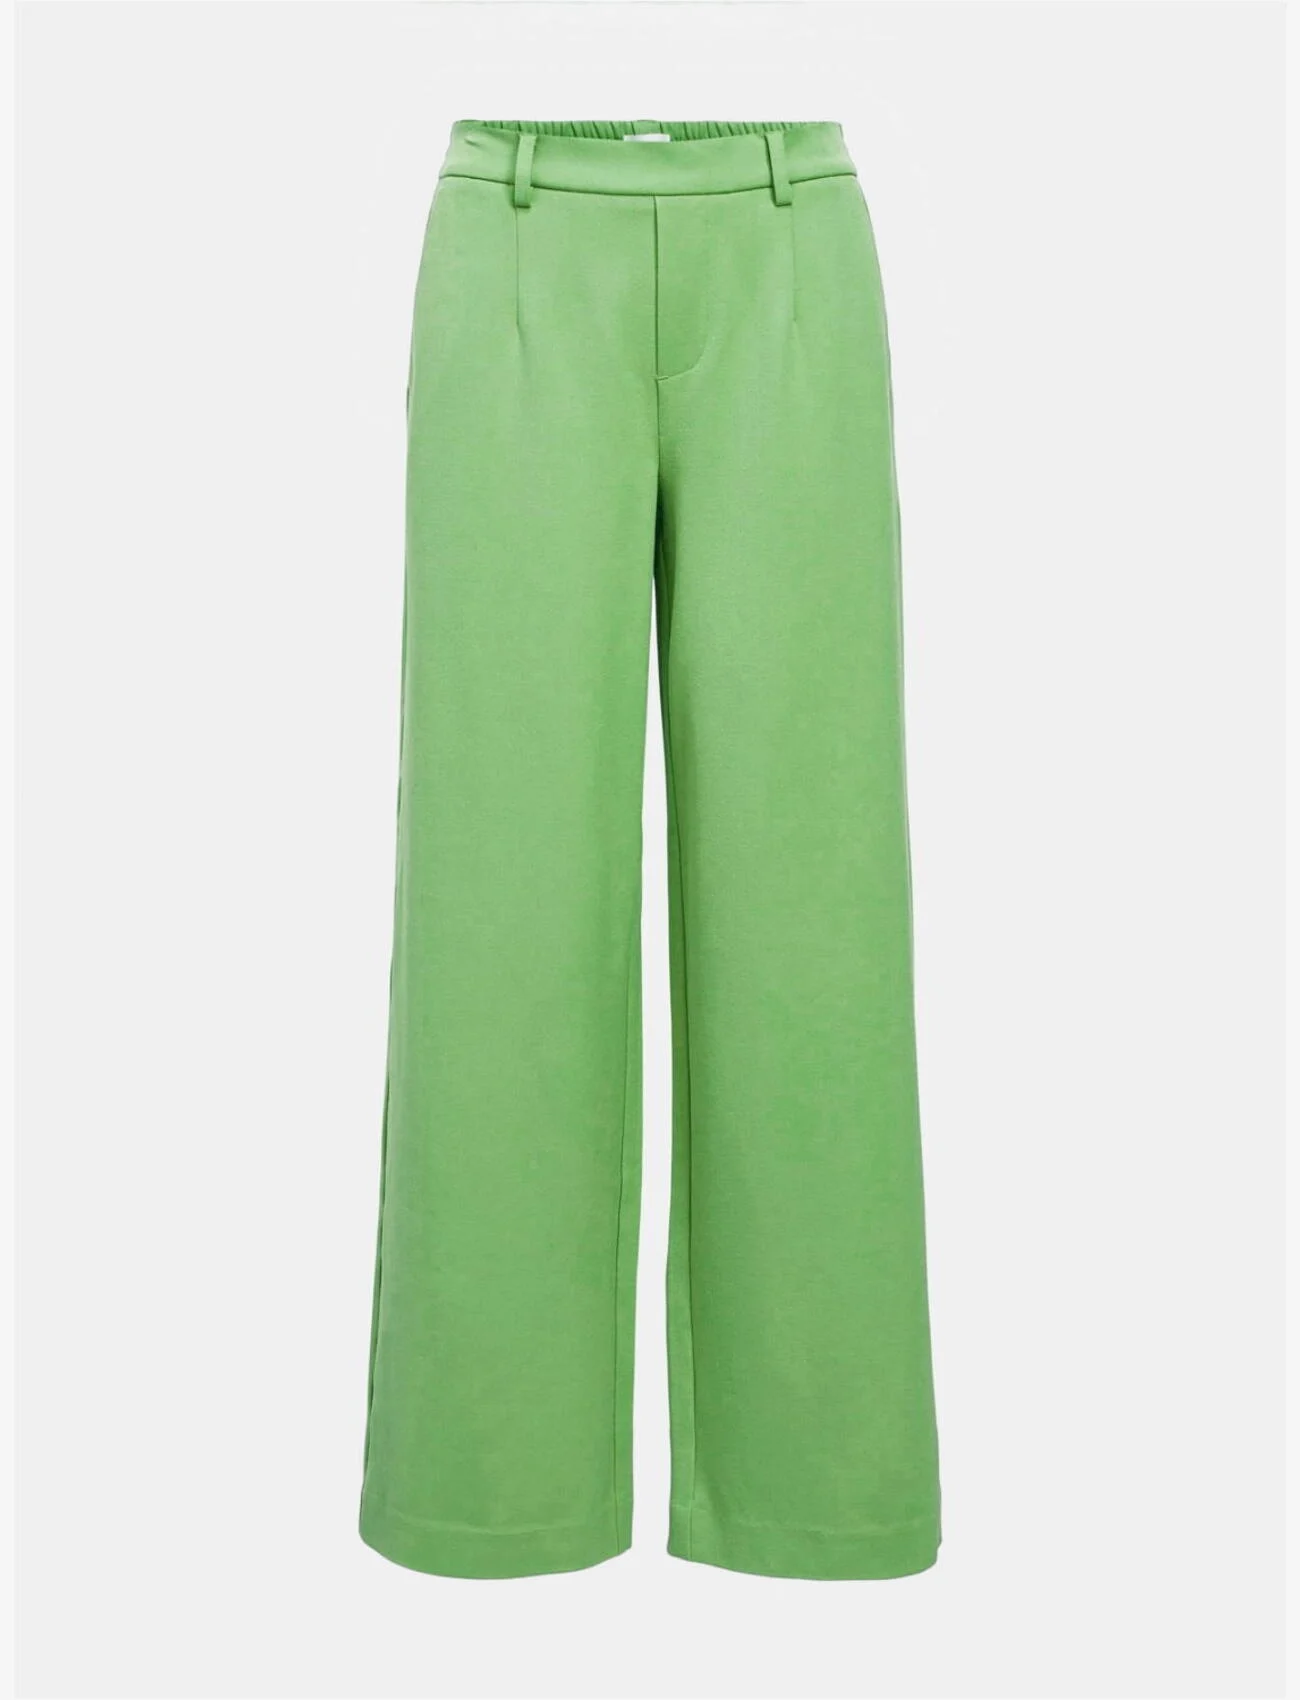 Object - OBJLISA WIDE PANT NOOS - party wear at outlet prices - vibrant green - 0